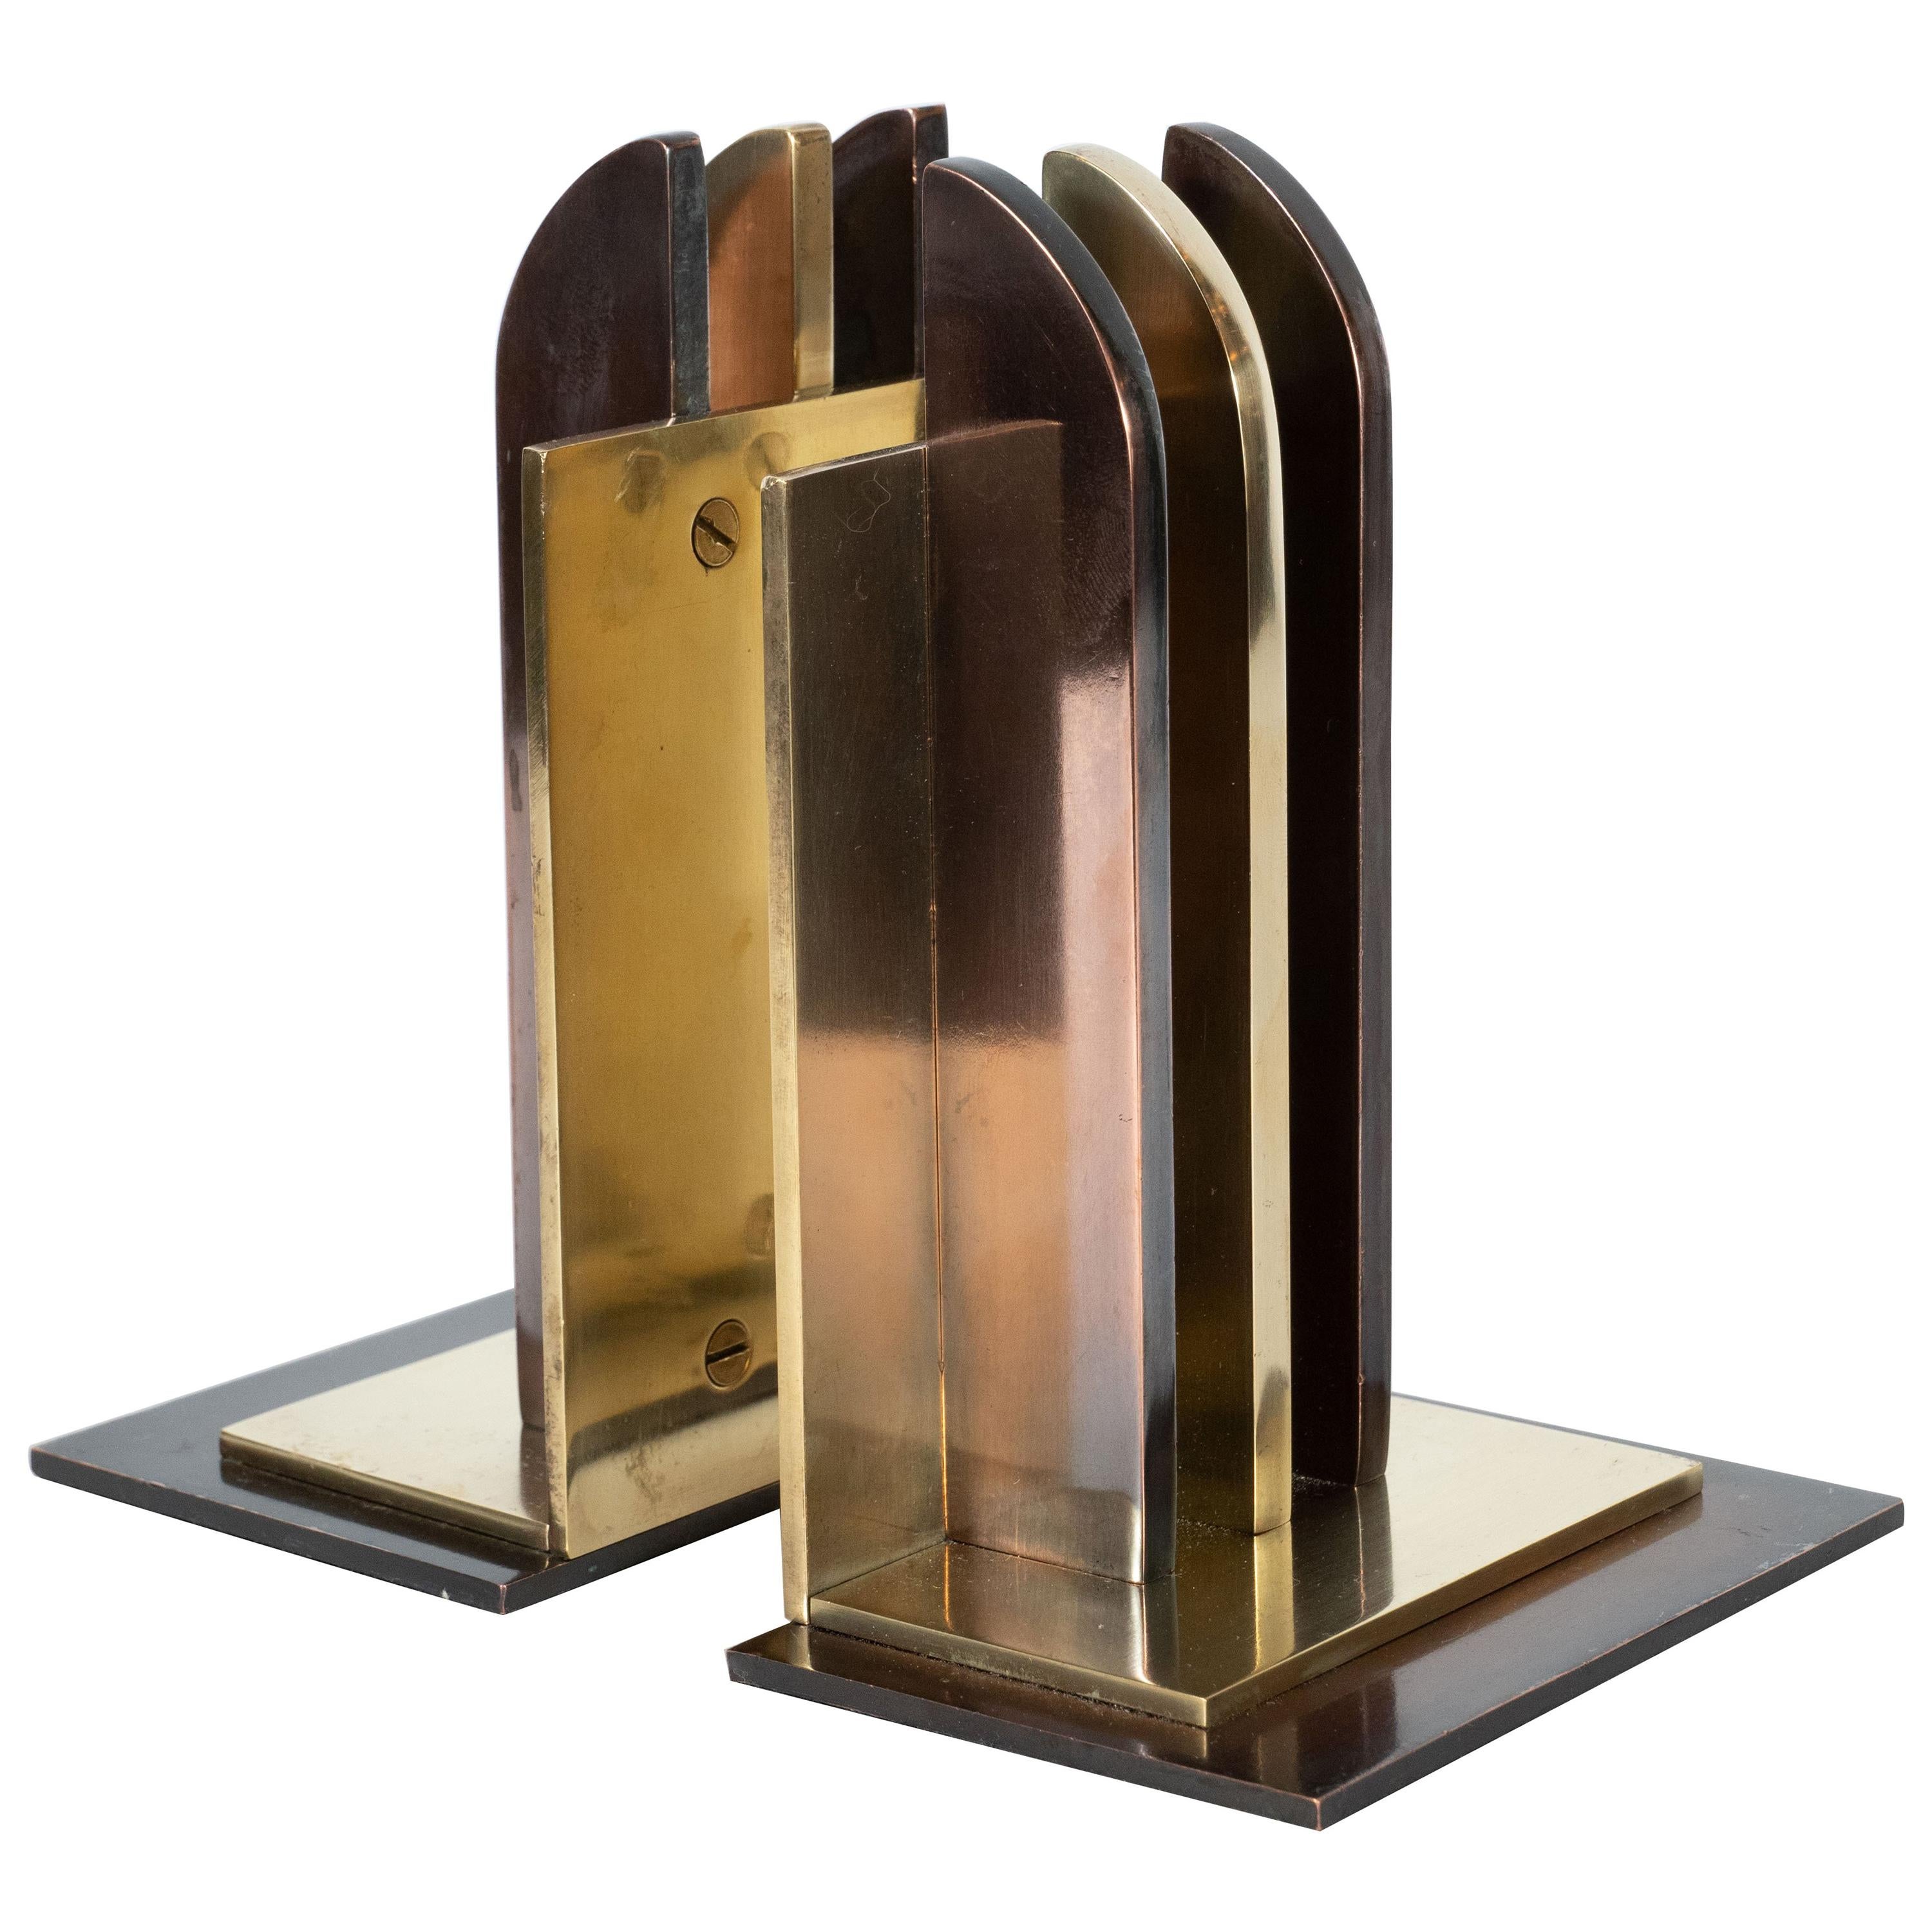 Art Deco Streamlined Copper & Brass Bookends by Walter Von Nessen for Chase Co.